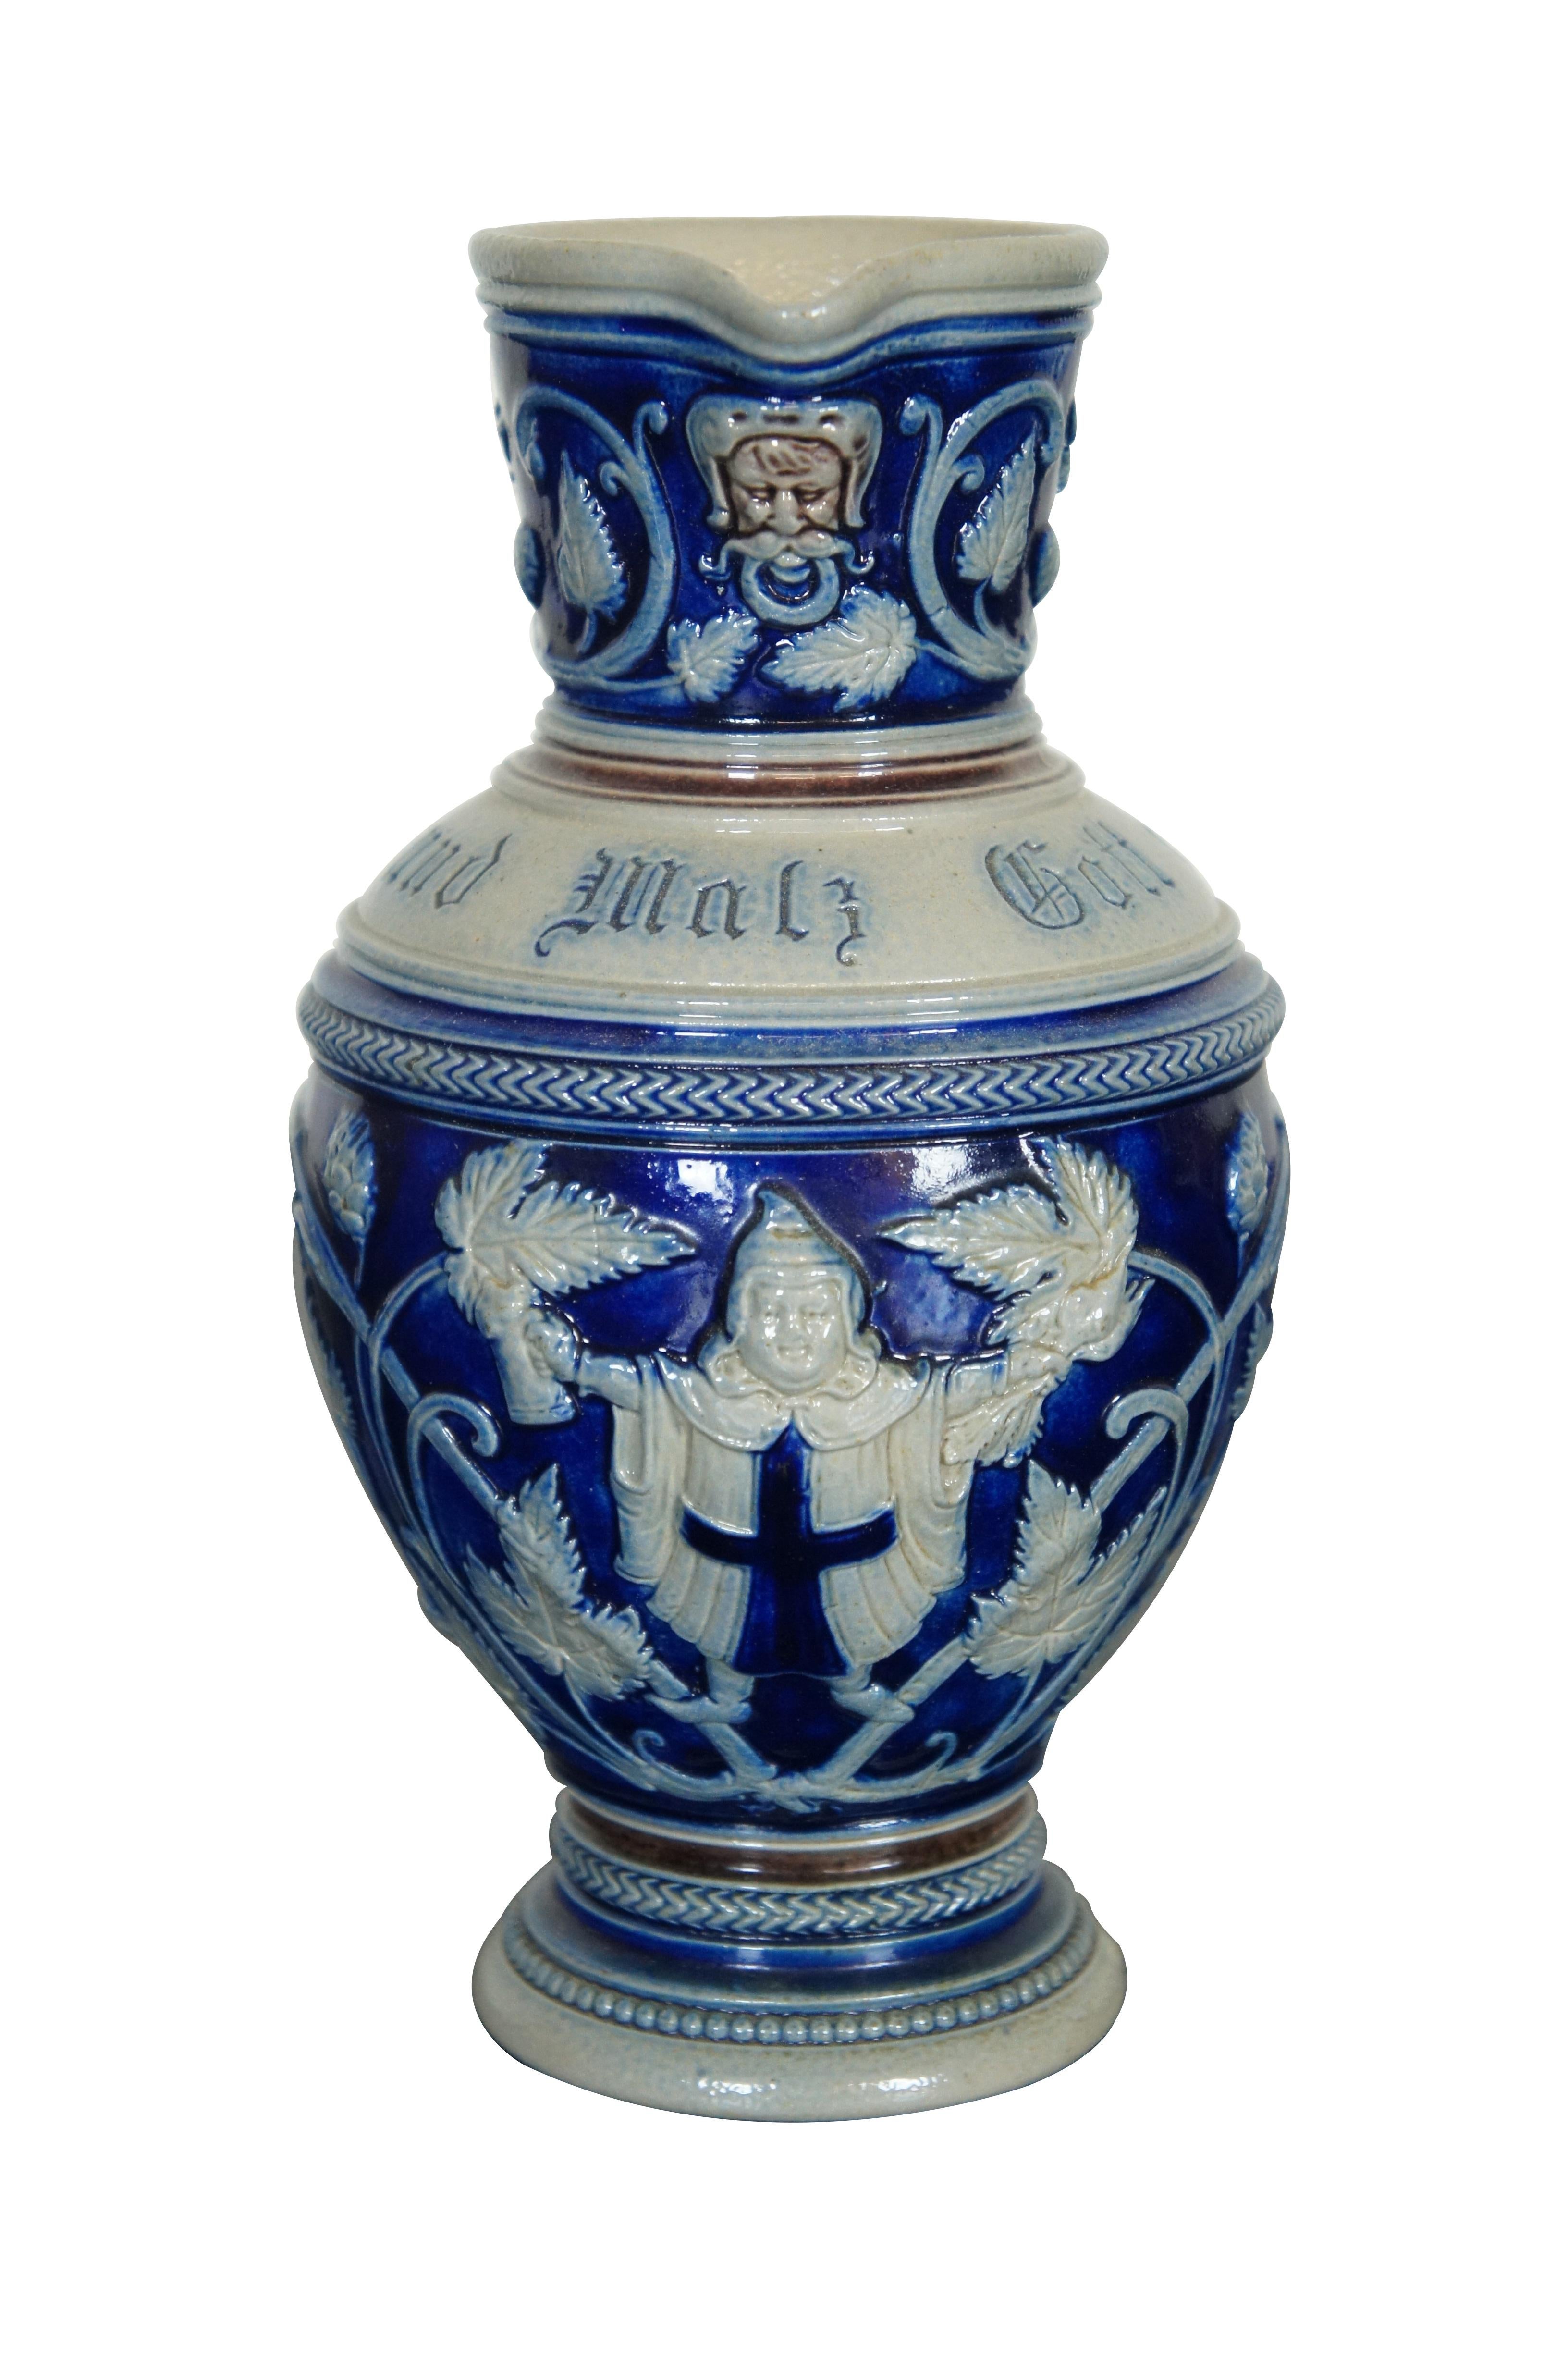 A lovely antique SImon Peter Gerz Stein / pitcher.  Blue and white salt glaze with a monk at the center wrapped within scrolling hops and barley.  Text reads: Hopfen und Malz Gott erhalt’s! Hops and malt, may the Lord preserve it.  The pitcher has a